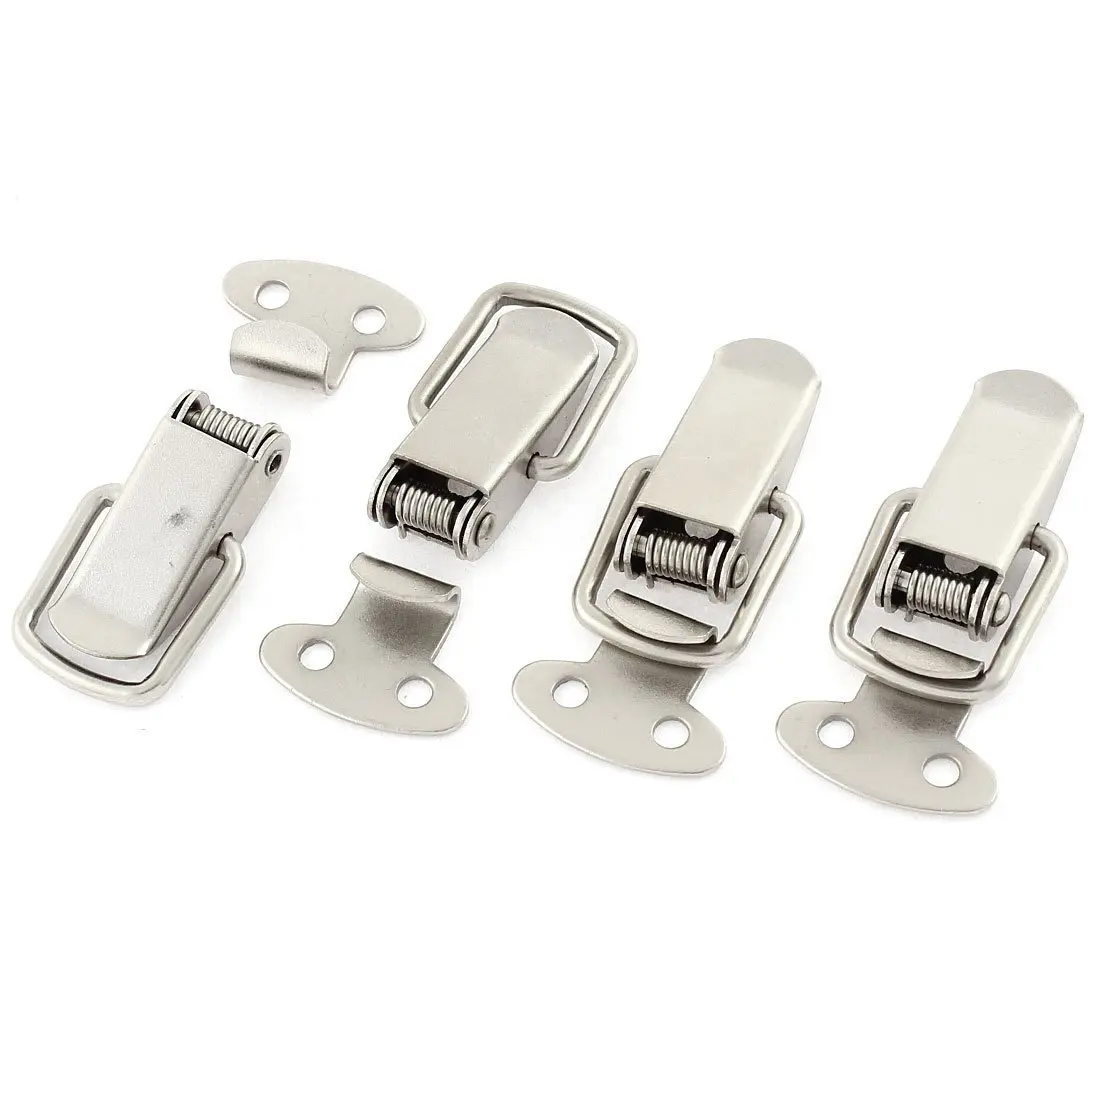 Cheap Cabinet Latch, find Cabinet Latch deals on line at Alibaba.com